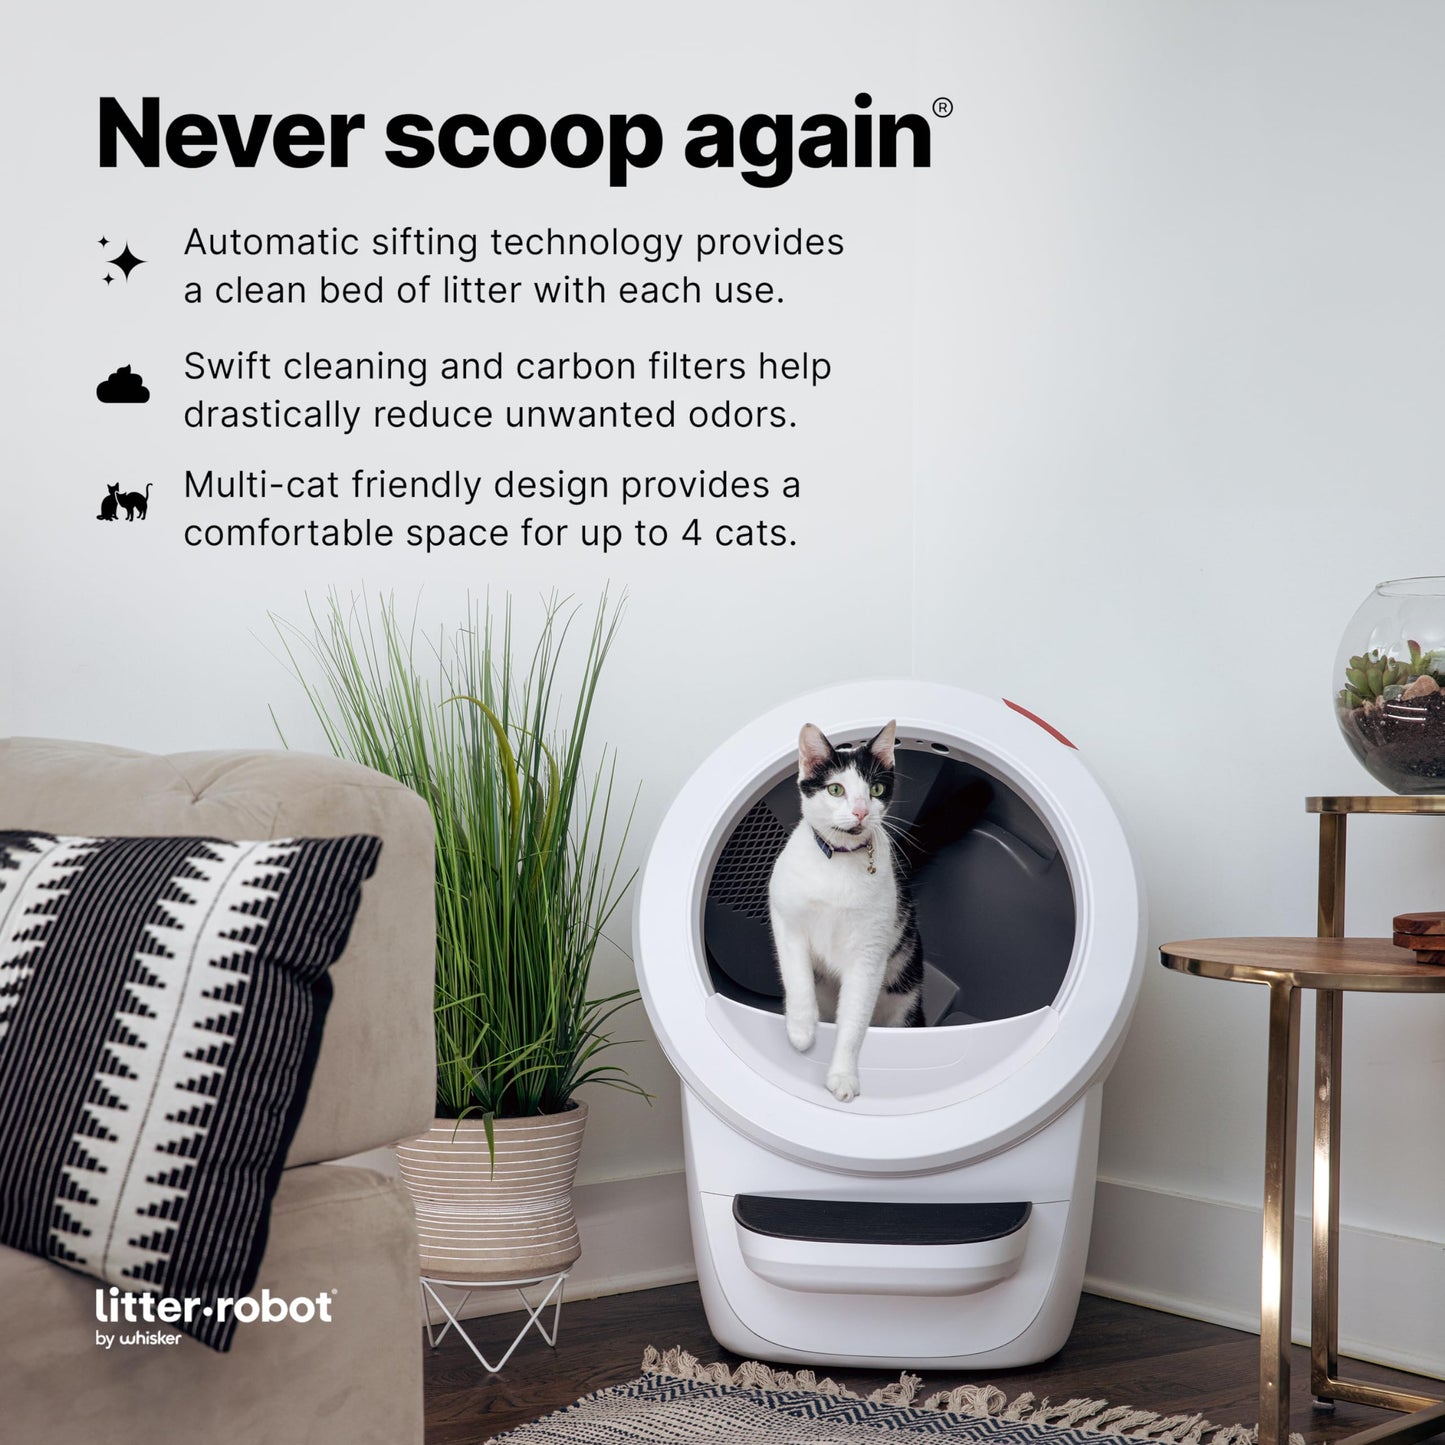 Litter-Robot 4 Bundle by Whisker, White - Automatic, Self-Cleaning Cat Litter Box, Includes Litter-Robot 4, 6 OdorTrap Pack Refills, 50 Waste Drawer Liners, Ramp, Mat & Fence